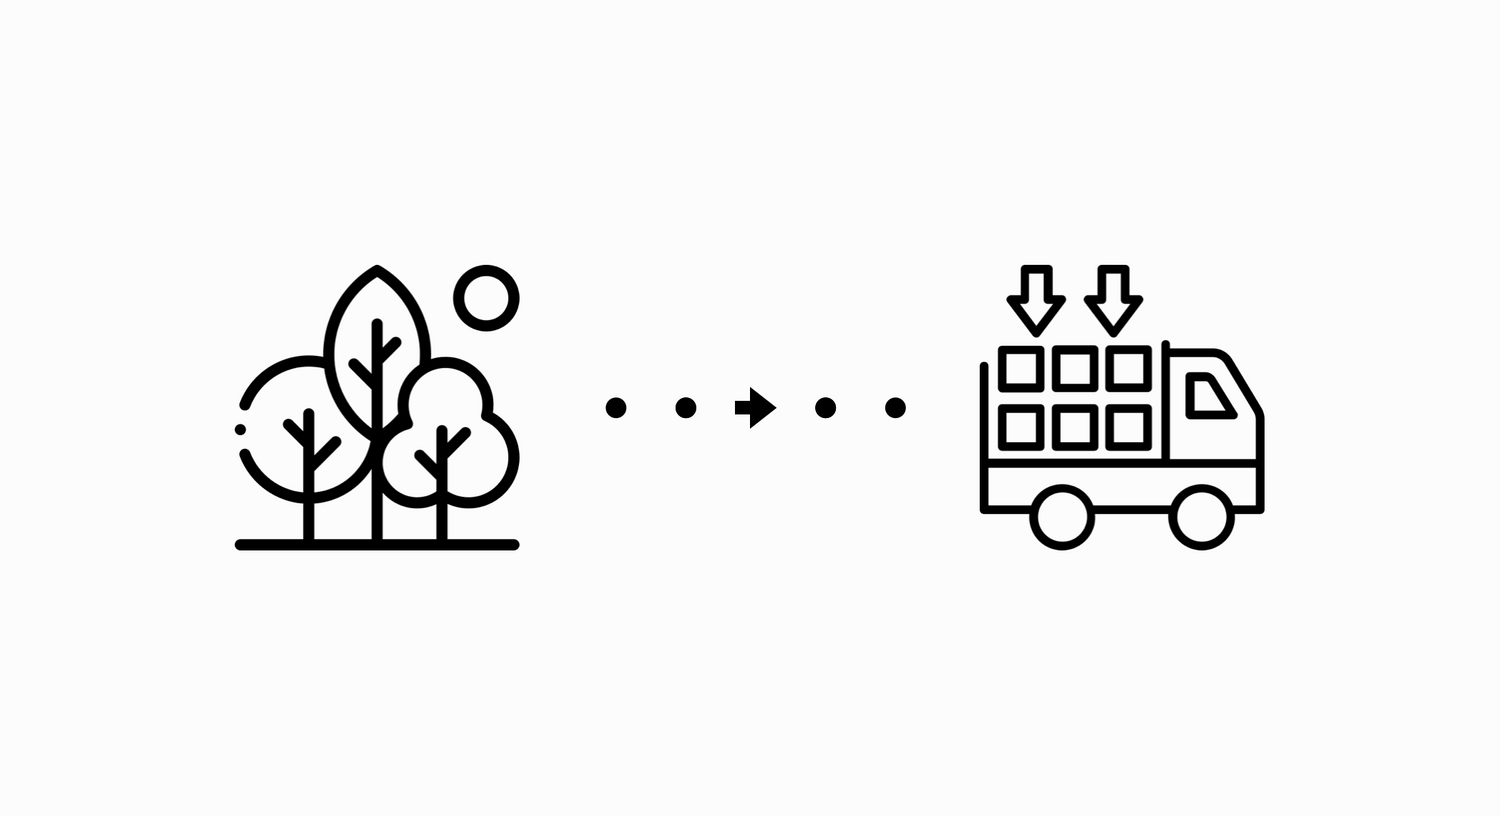 The journey of our logs from timber in the forest to firewood at your house.  Image made up of icons of a forest with arrows pointing to a delivery van